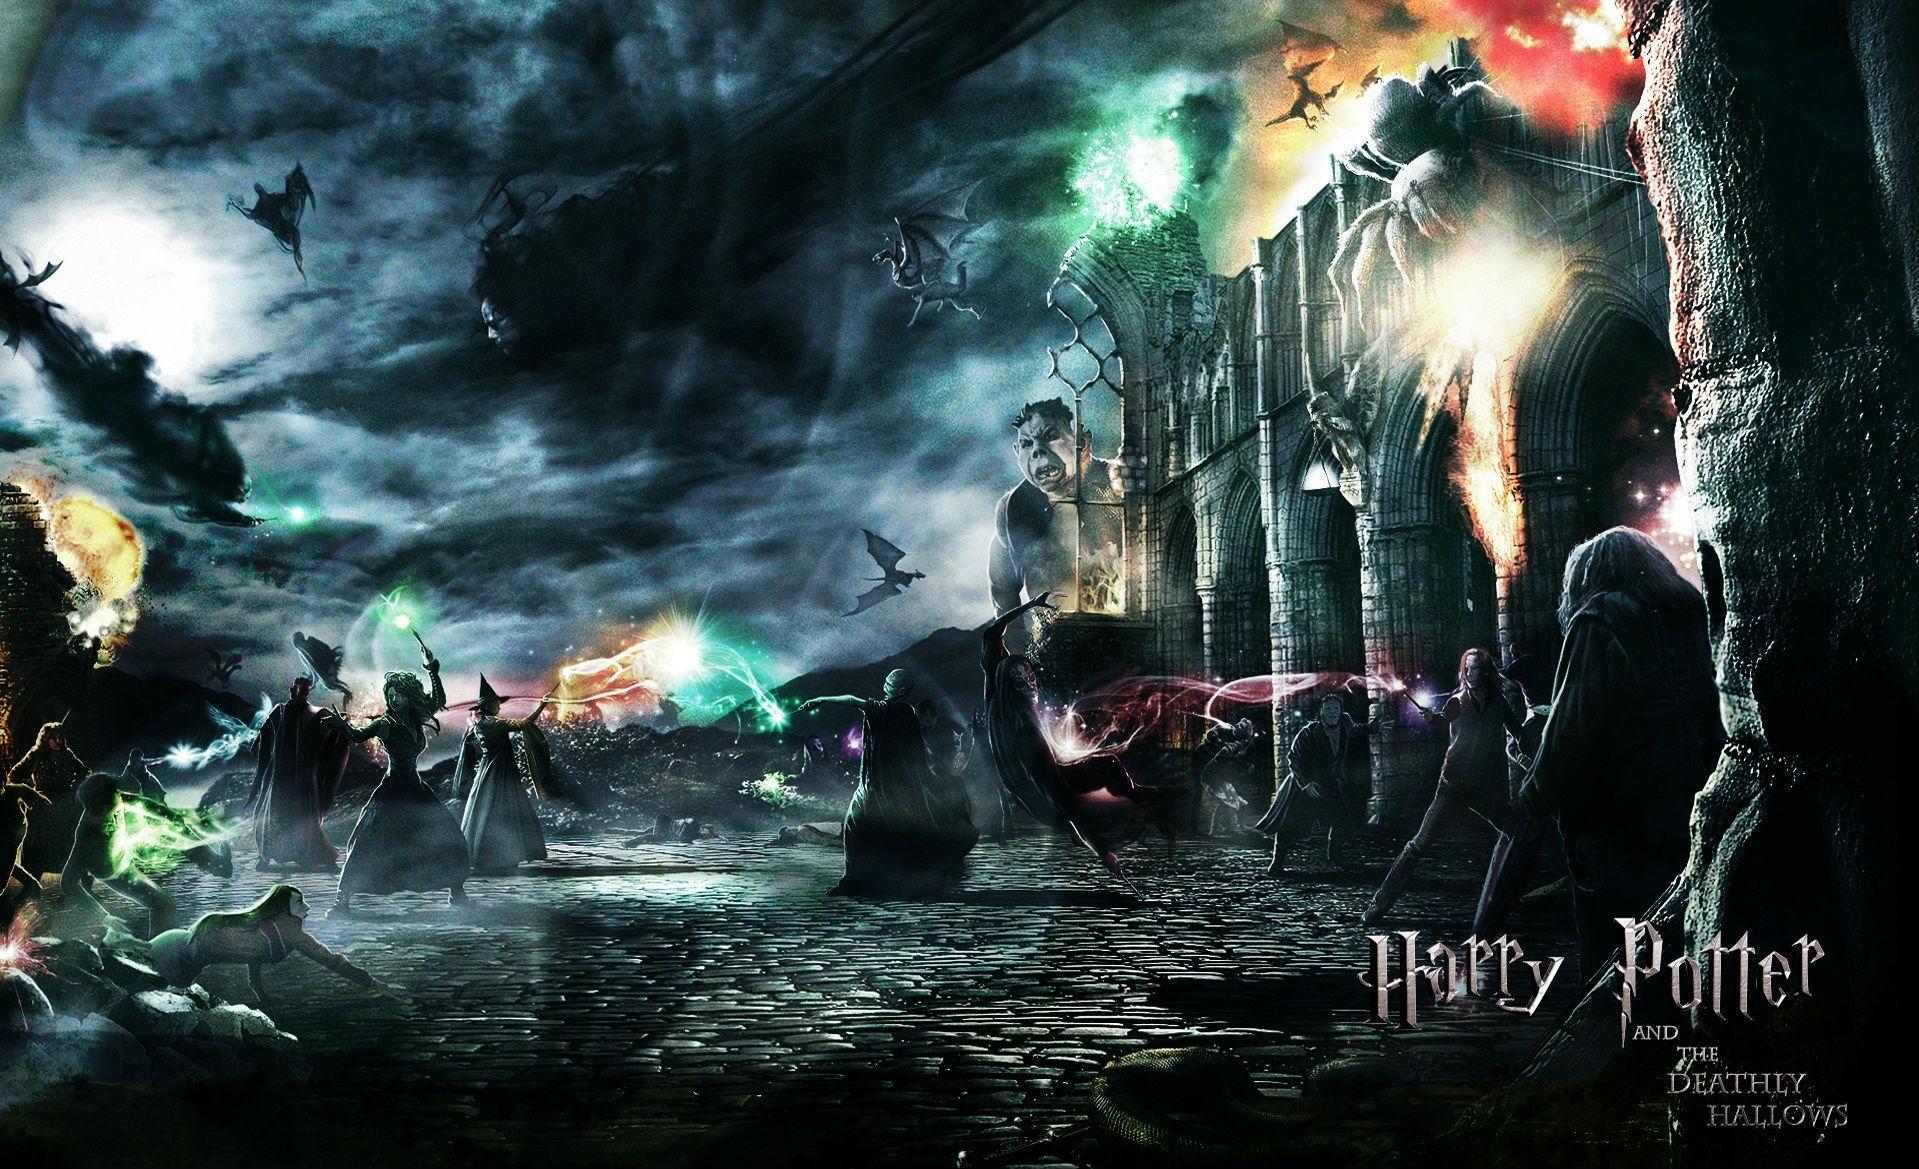 Wallpaper Blink Potter and the Deathly Hallows: Part 2